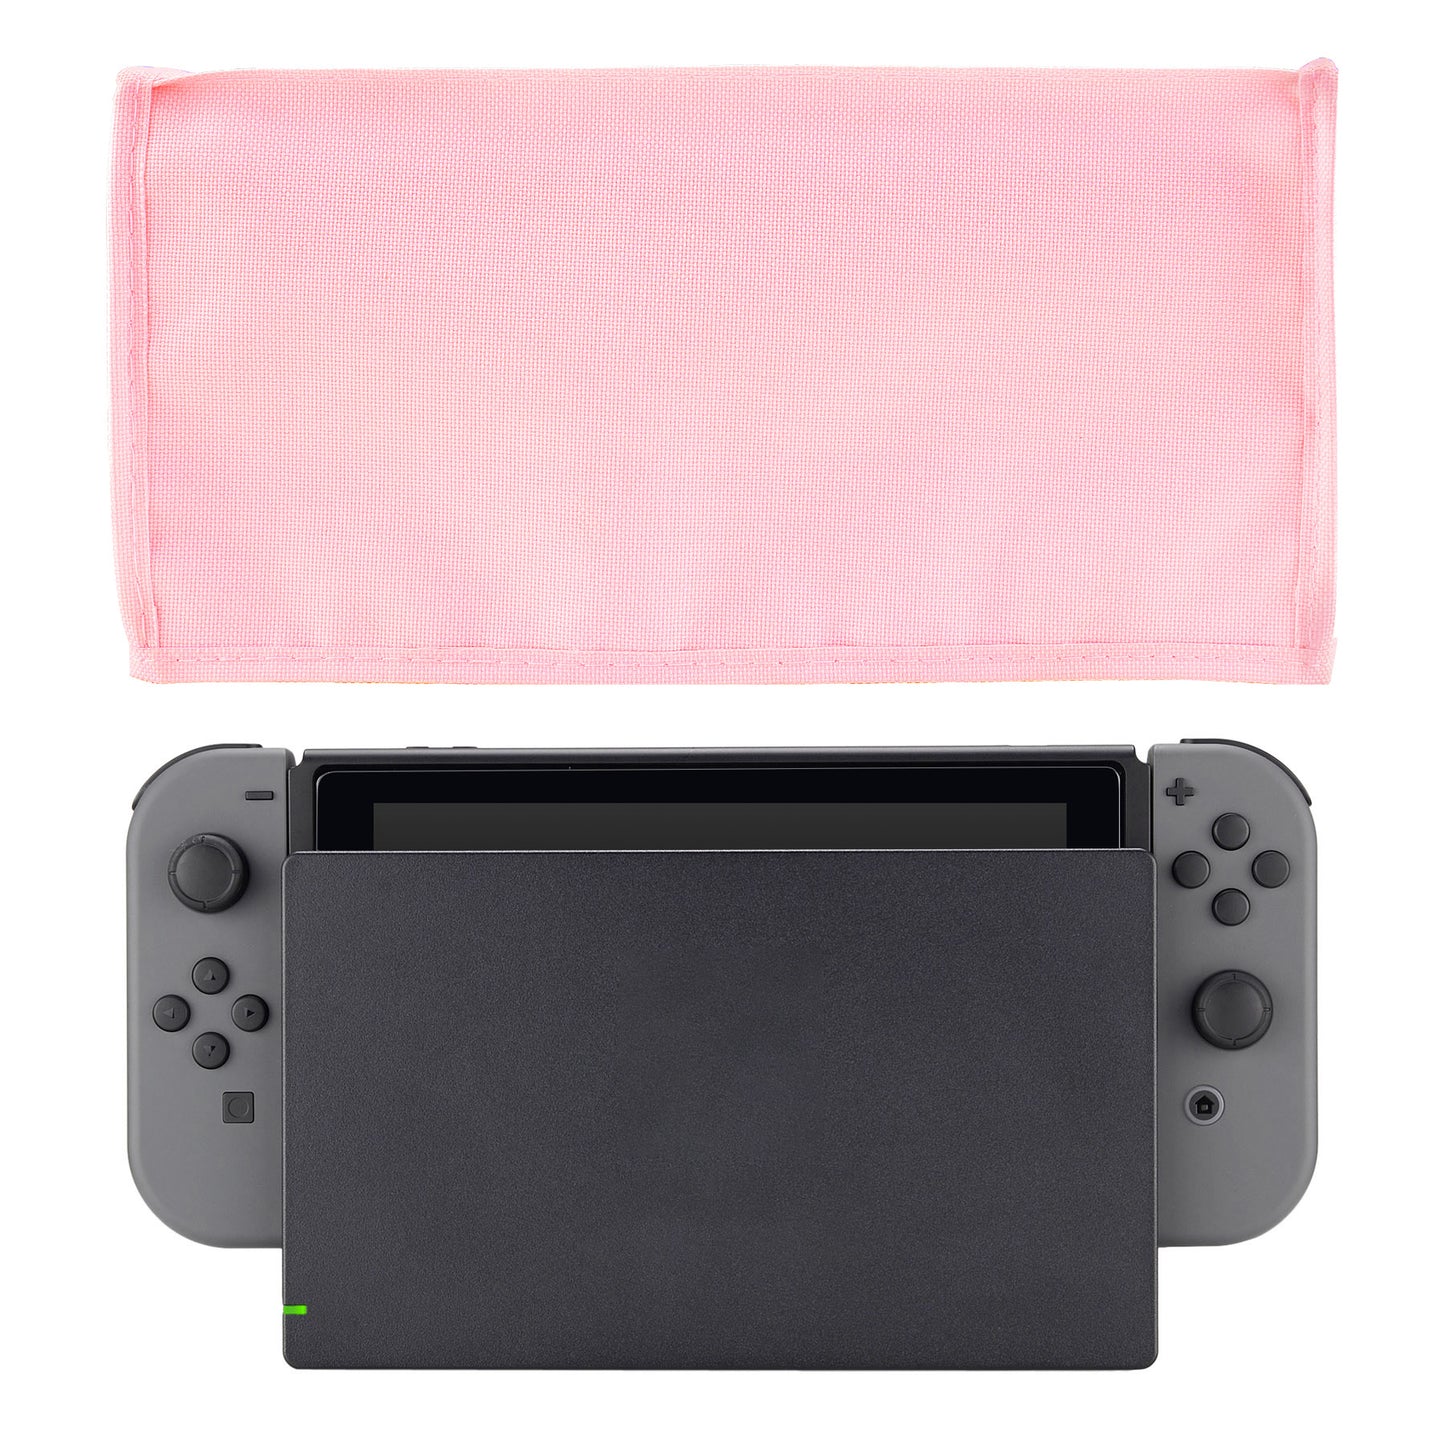 PlayVital Nylon Dust Cover, Soft Neat Lining Dust Guard, Anti Scratch Waterproof Cover Sleeve for Nintendo Switch & Switch OLED Charging Dock - Cherry Blossoms Pink - NTA8008 PlayVital